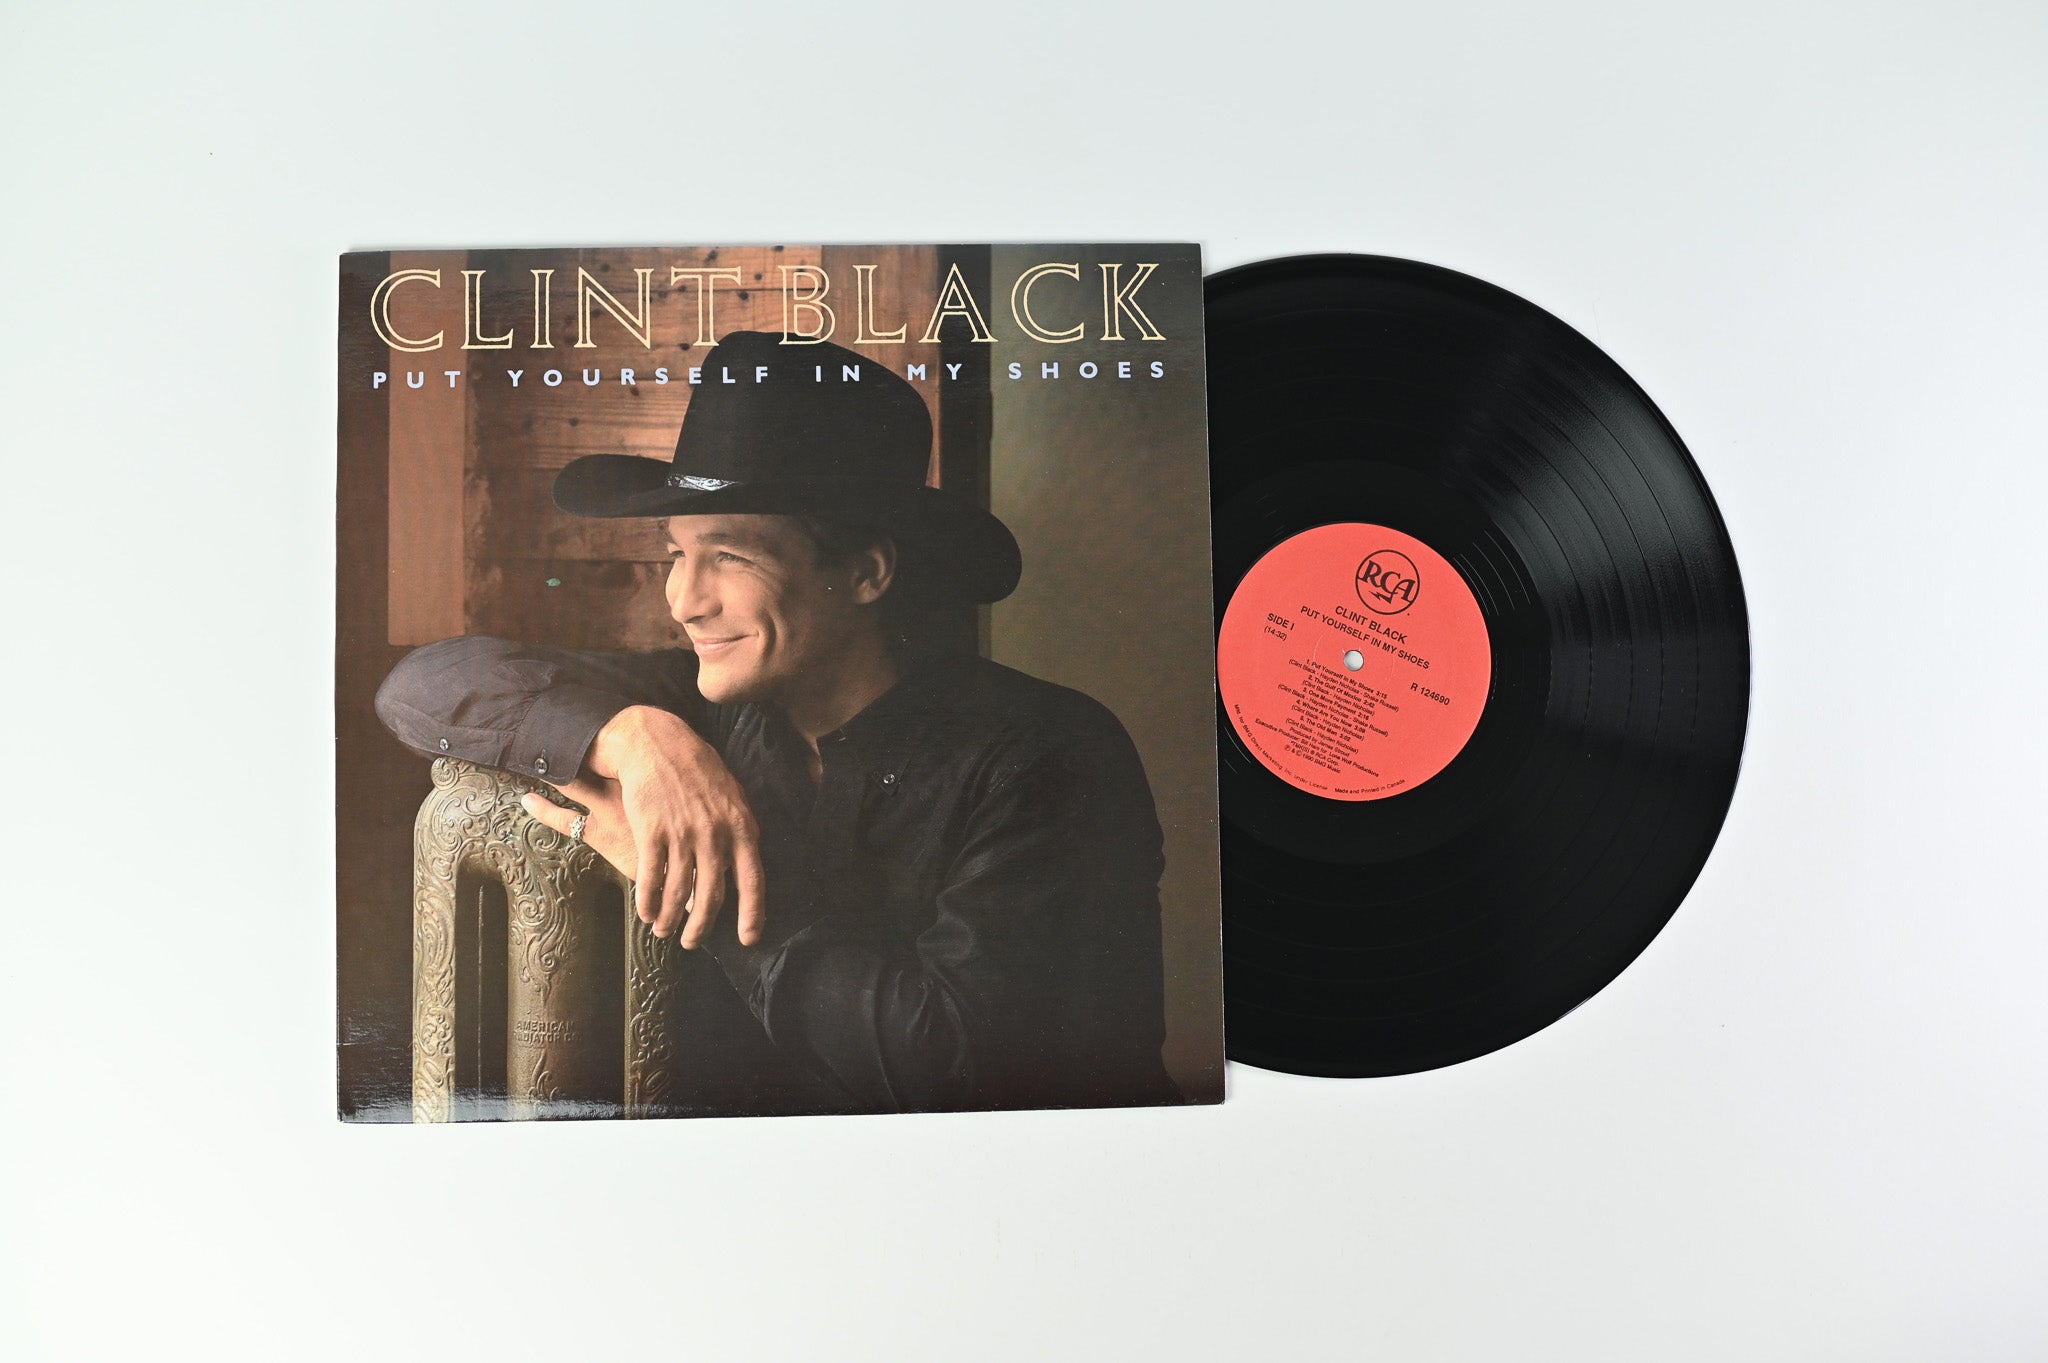 Clint Black - Put Yourself In My Shoes on RCA Canadian